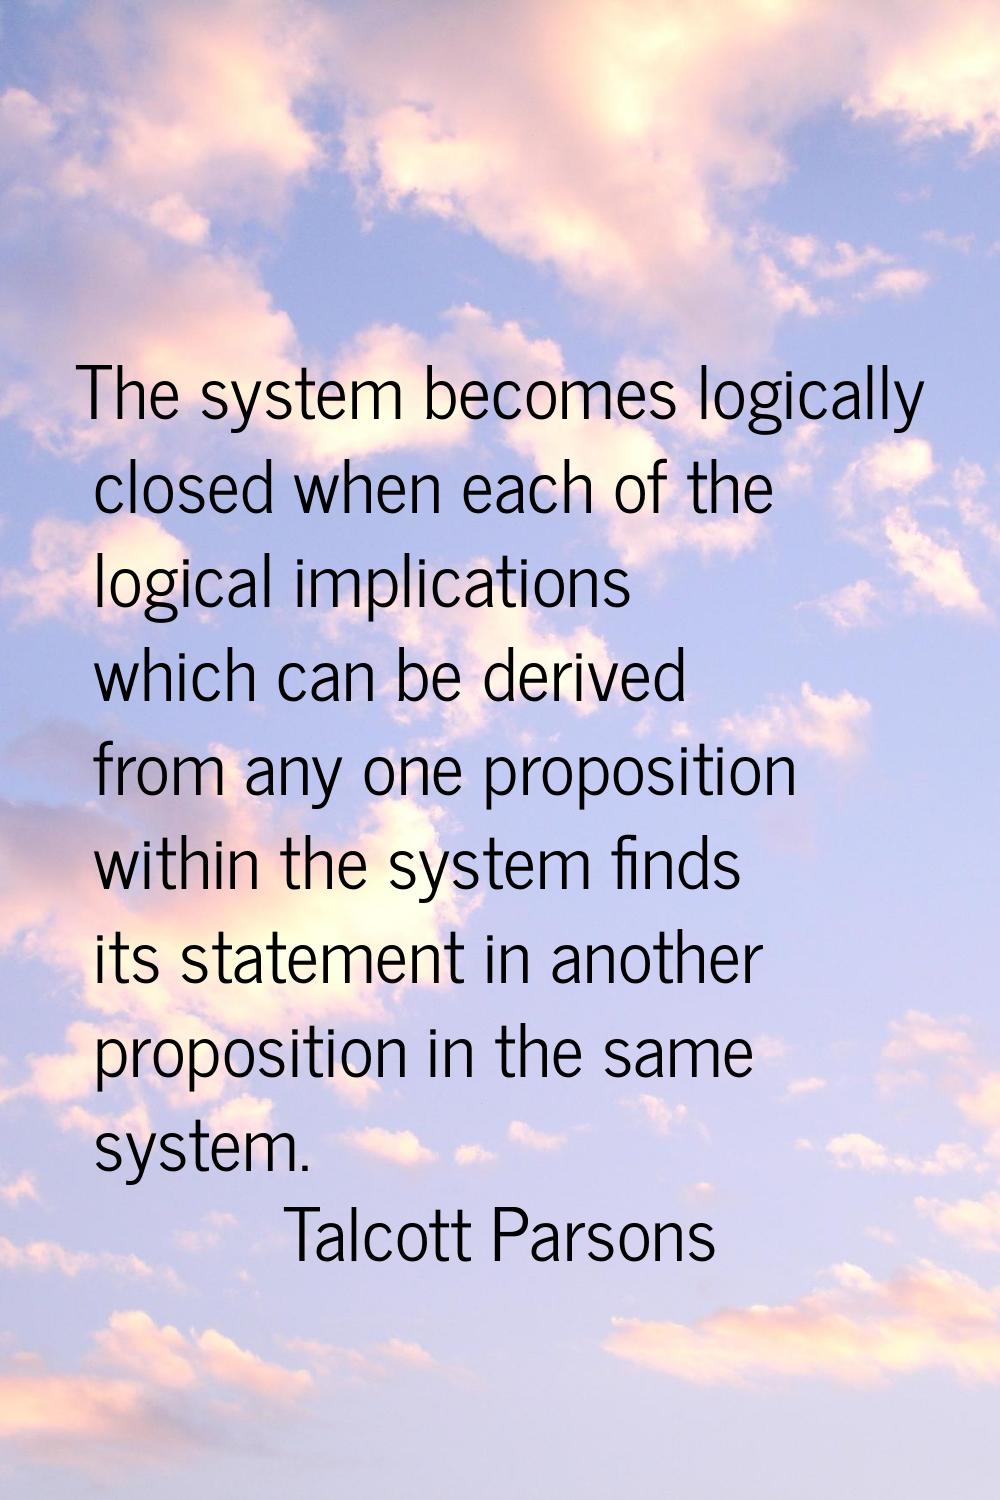 The system becomes logically closed when each of the logical implications which can be derived from